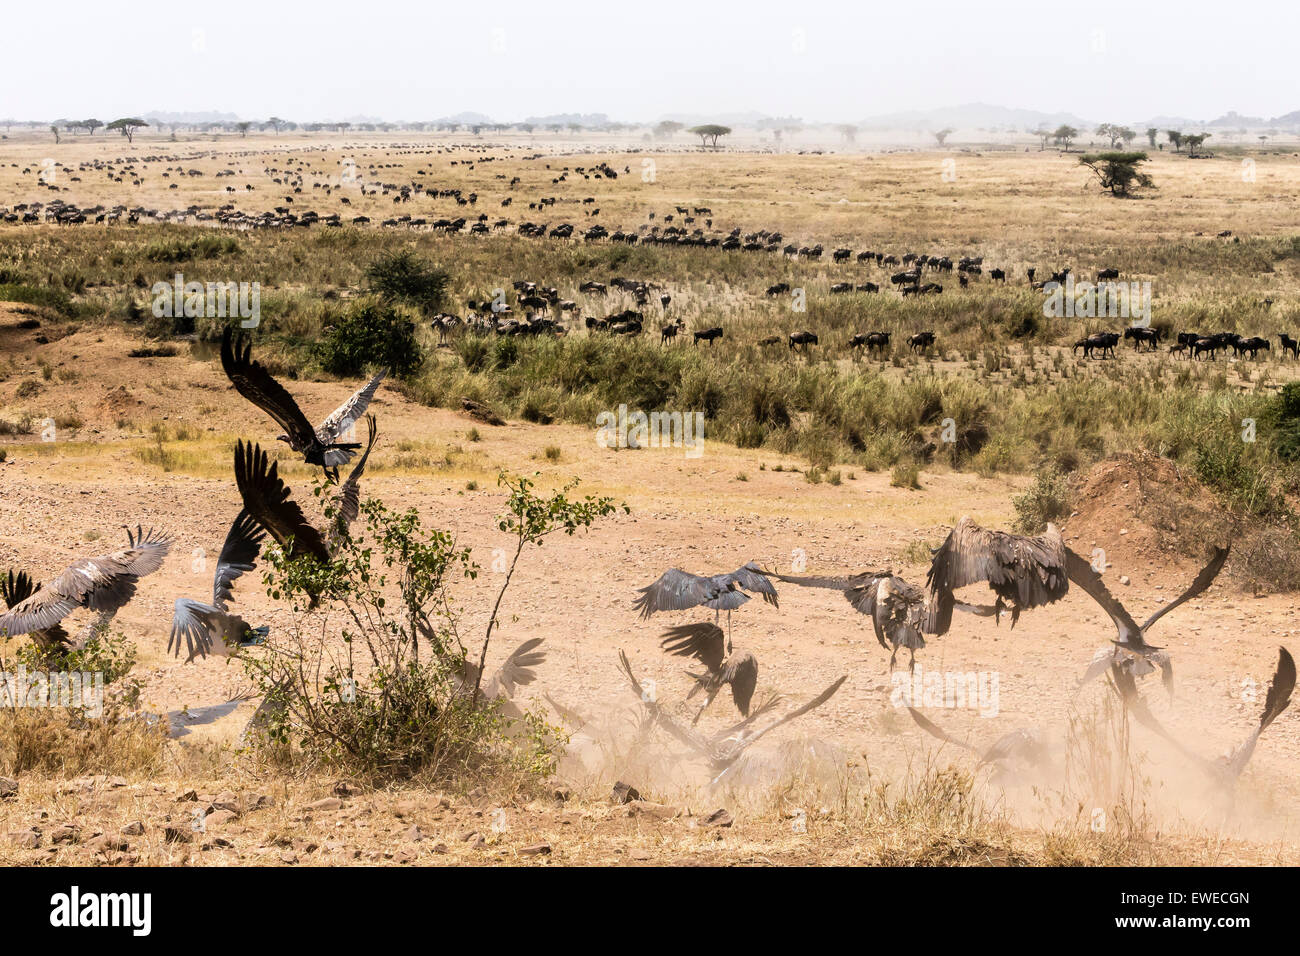 Long lines of wildebeest (Connochaetes taurinus), watched by vultures,    migrate in search of fresh grass in the Serengeti Tanzania Stock Photo